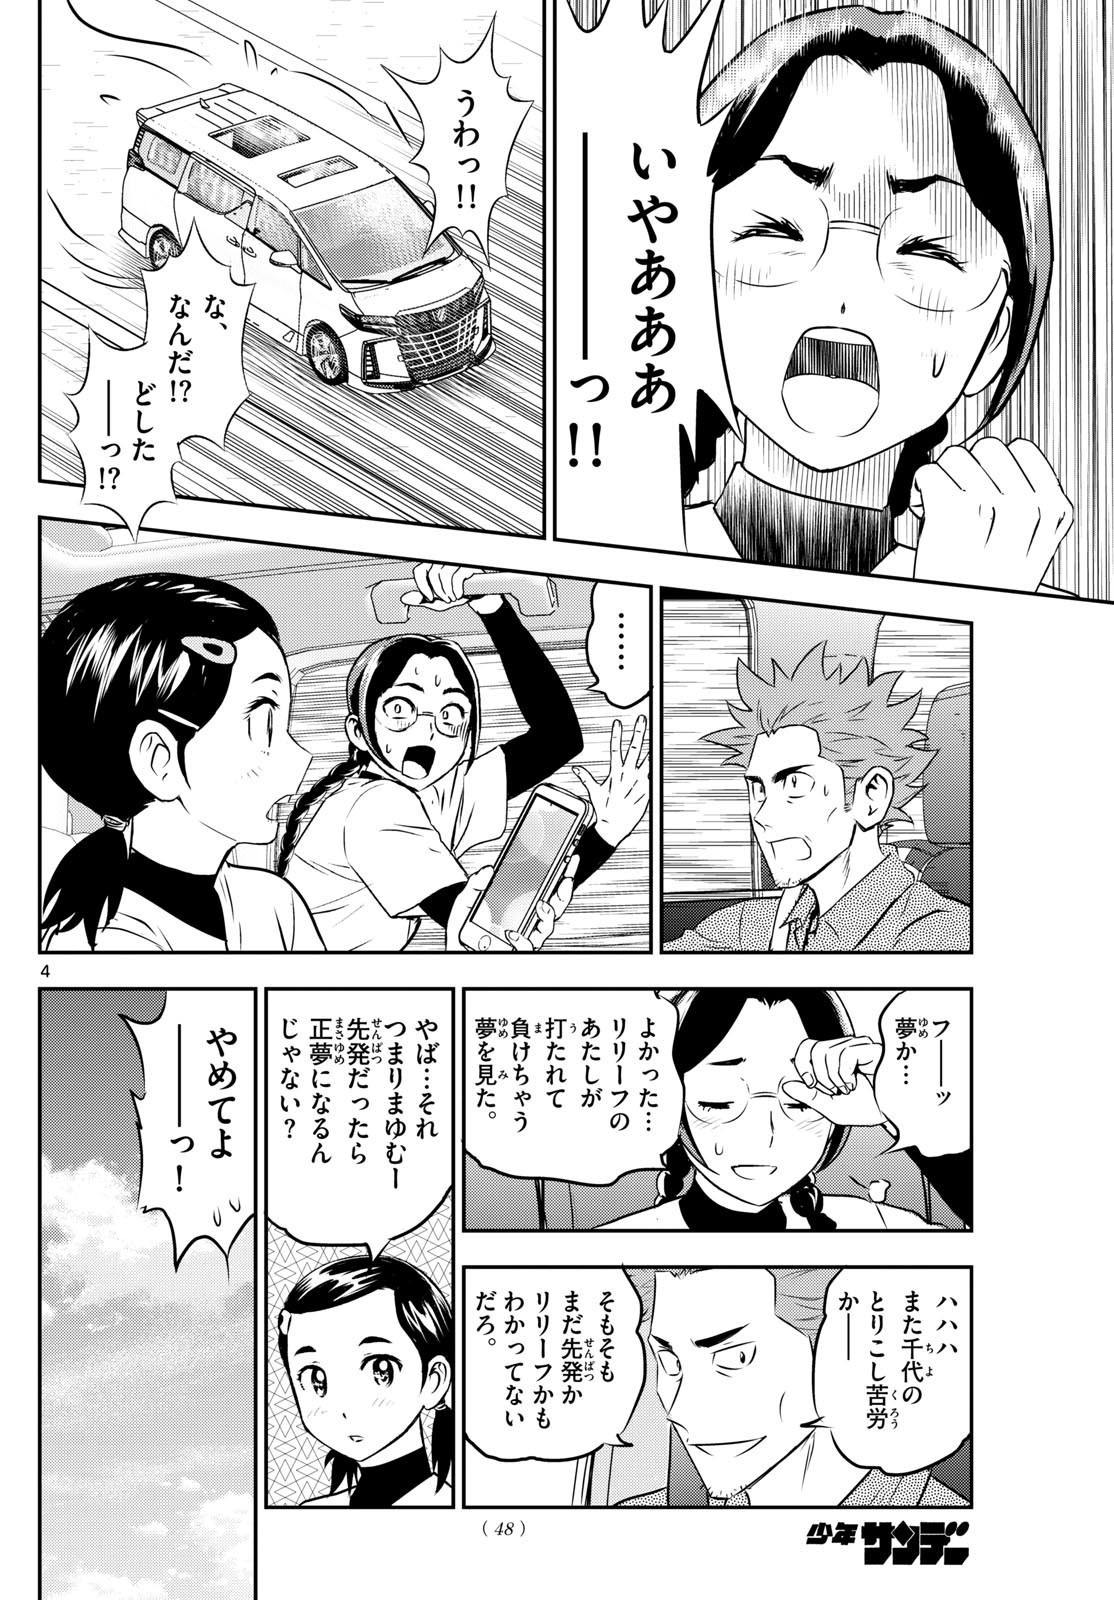 Major 2nd - メジャーセカンド - Chapter 283 - Page 4